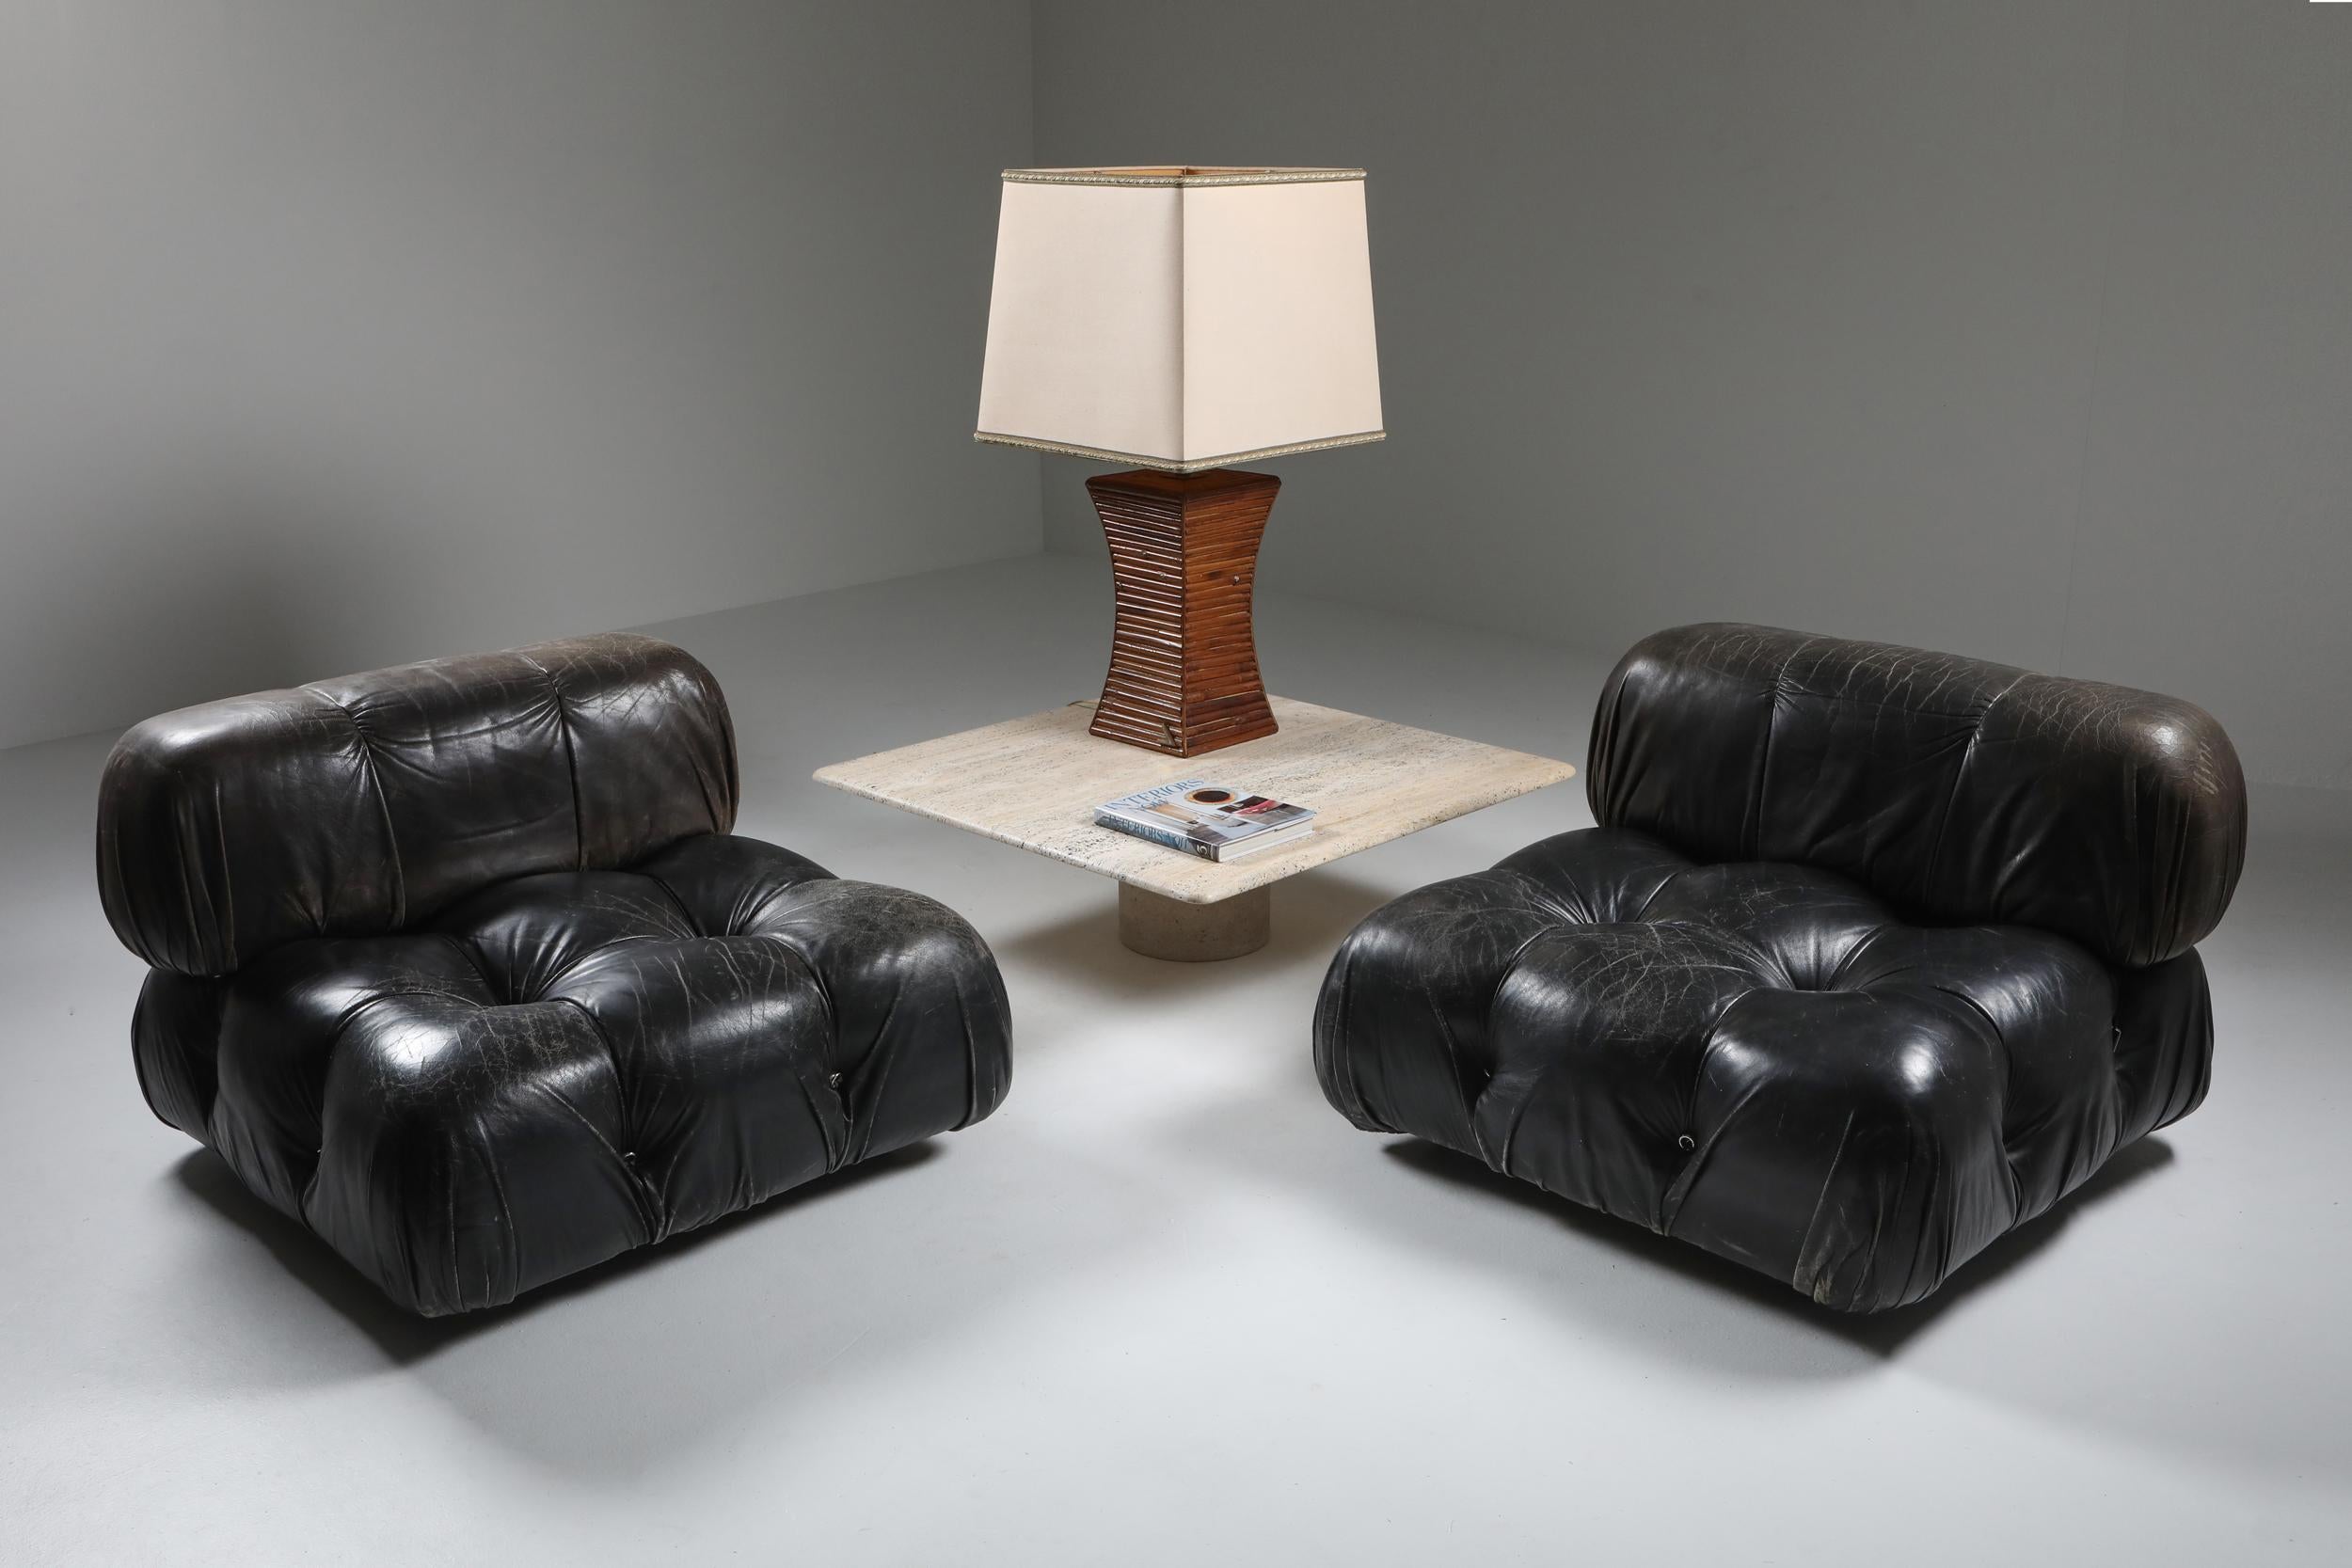 Camaleonda lounge chairs, Mario Bellini, black original leather, B&B Italia
 
This modular sofa was designed by Mario Bellini in 1971 and was manufactured first by C&B and later by B&B Italia. H is design became famous almost immediately after it